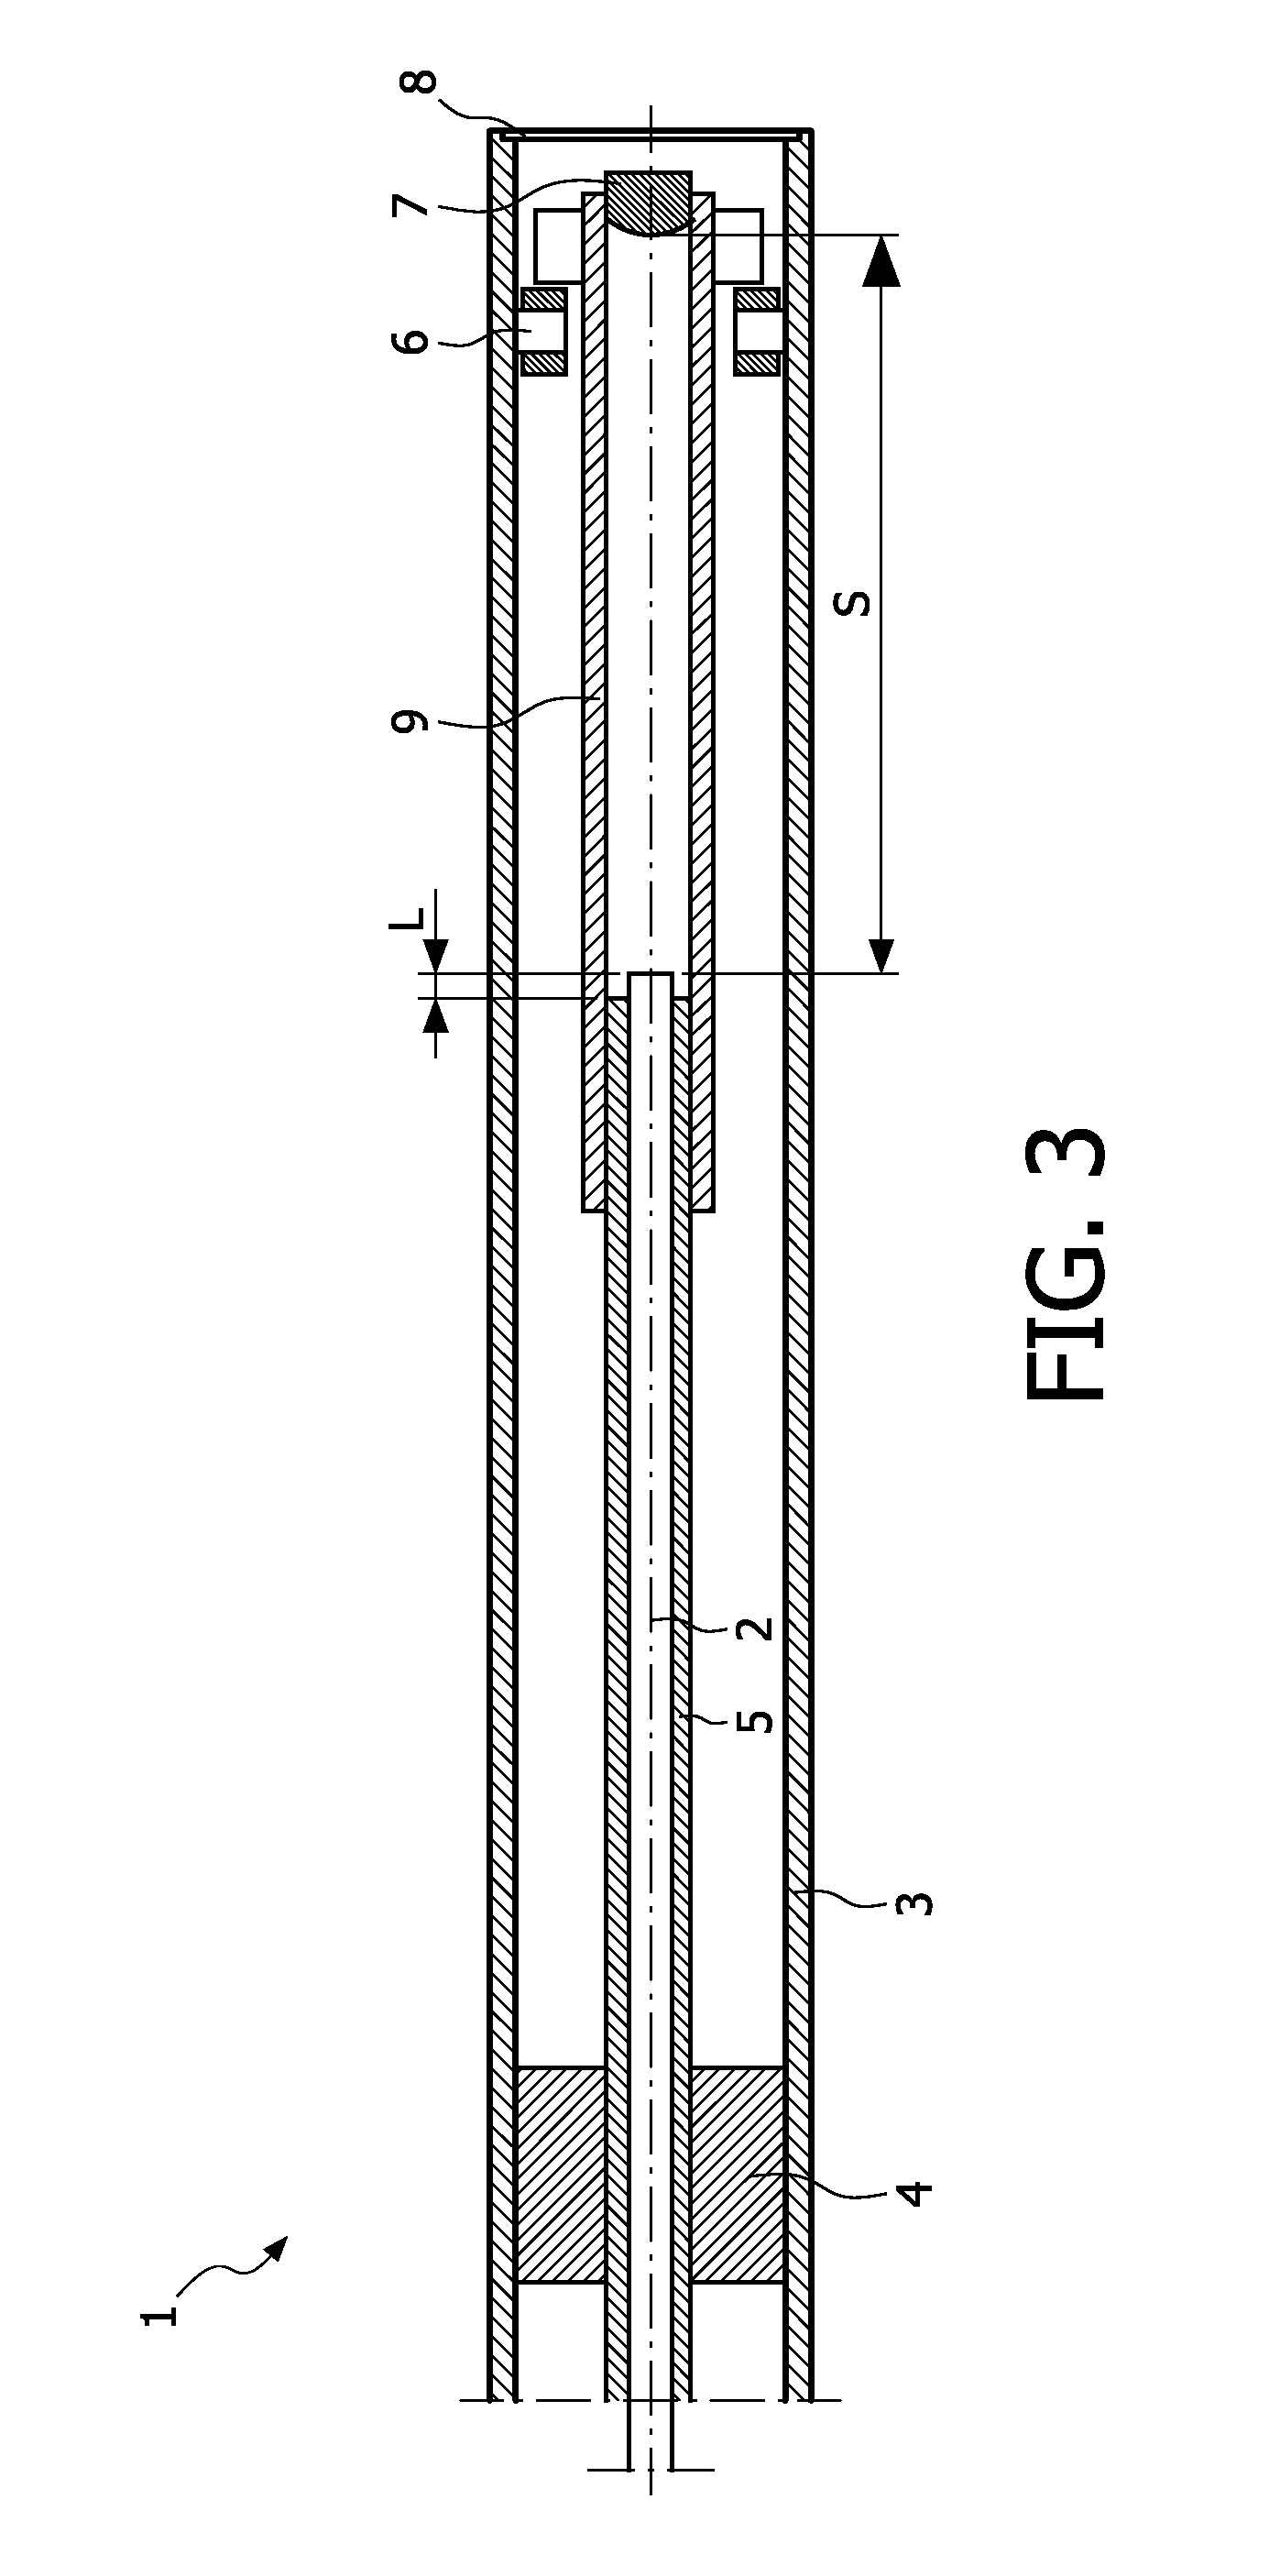 Optical scanning probe assembly